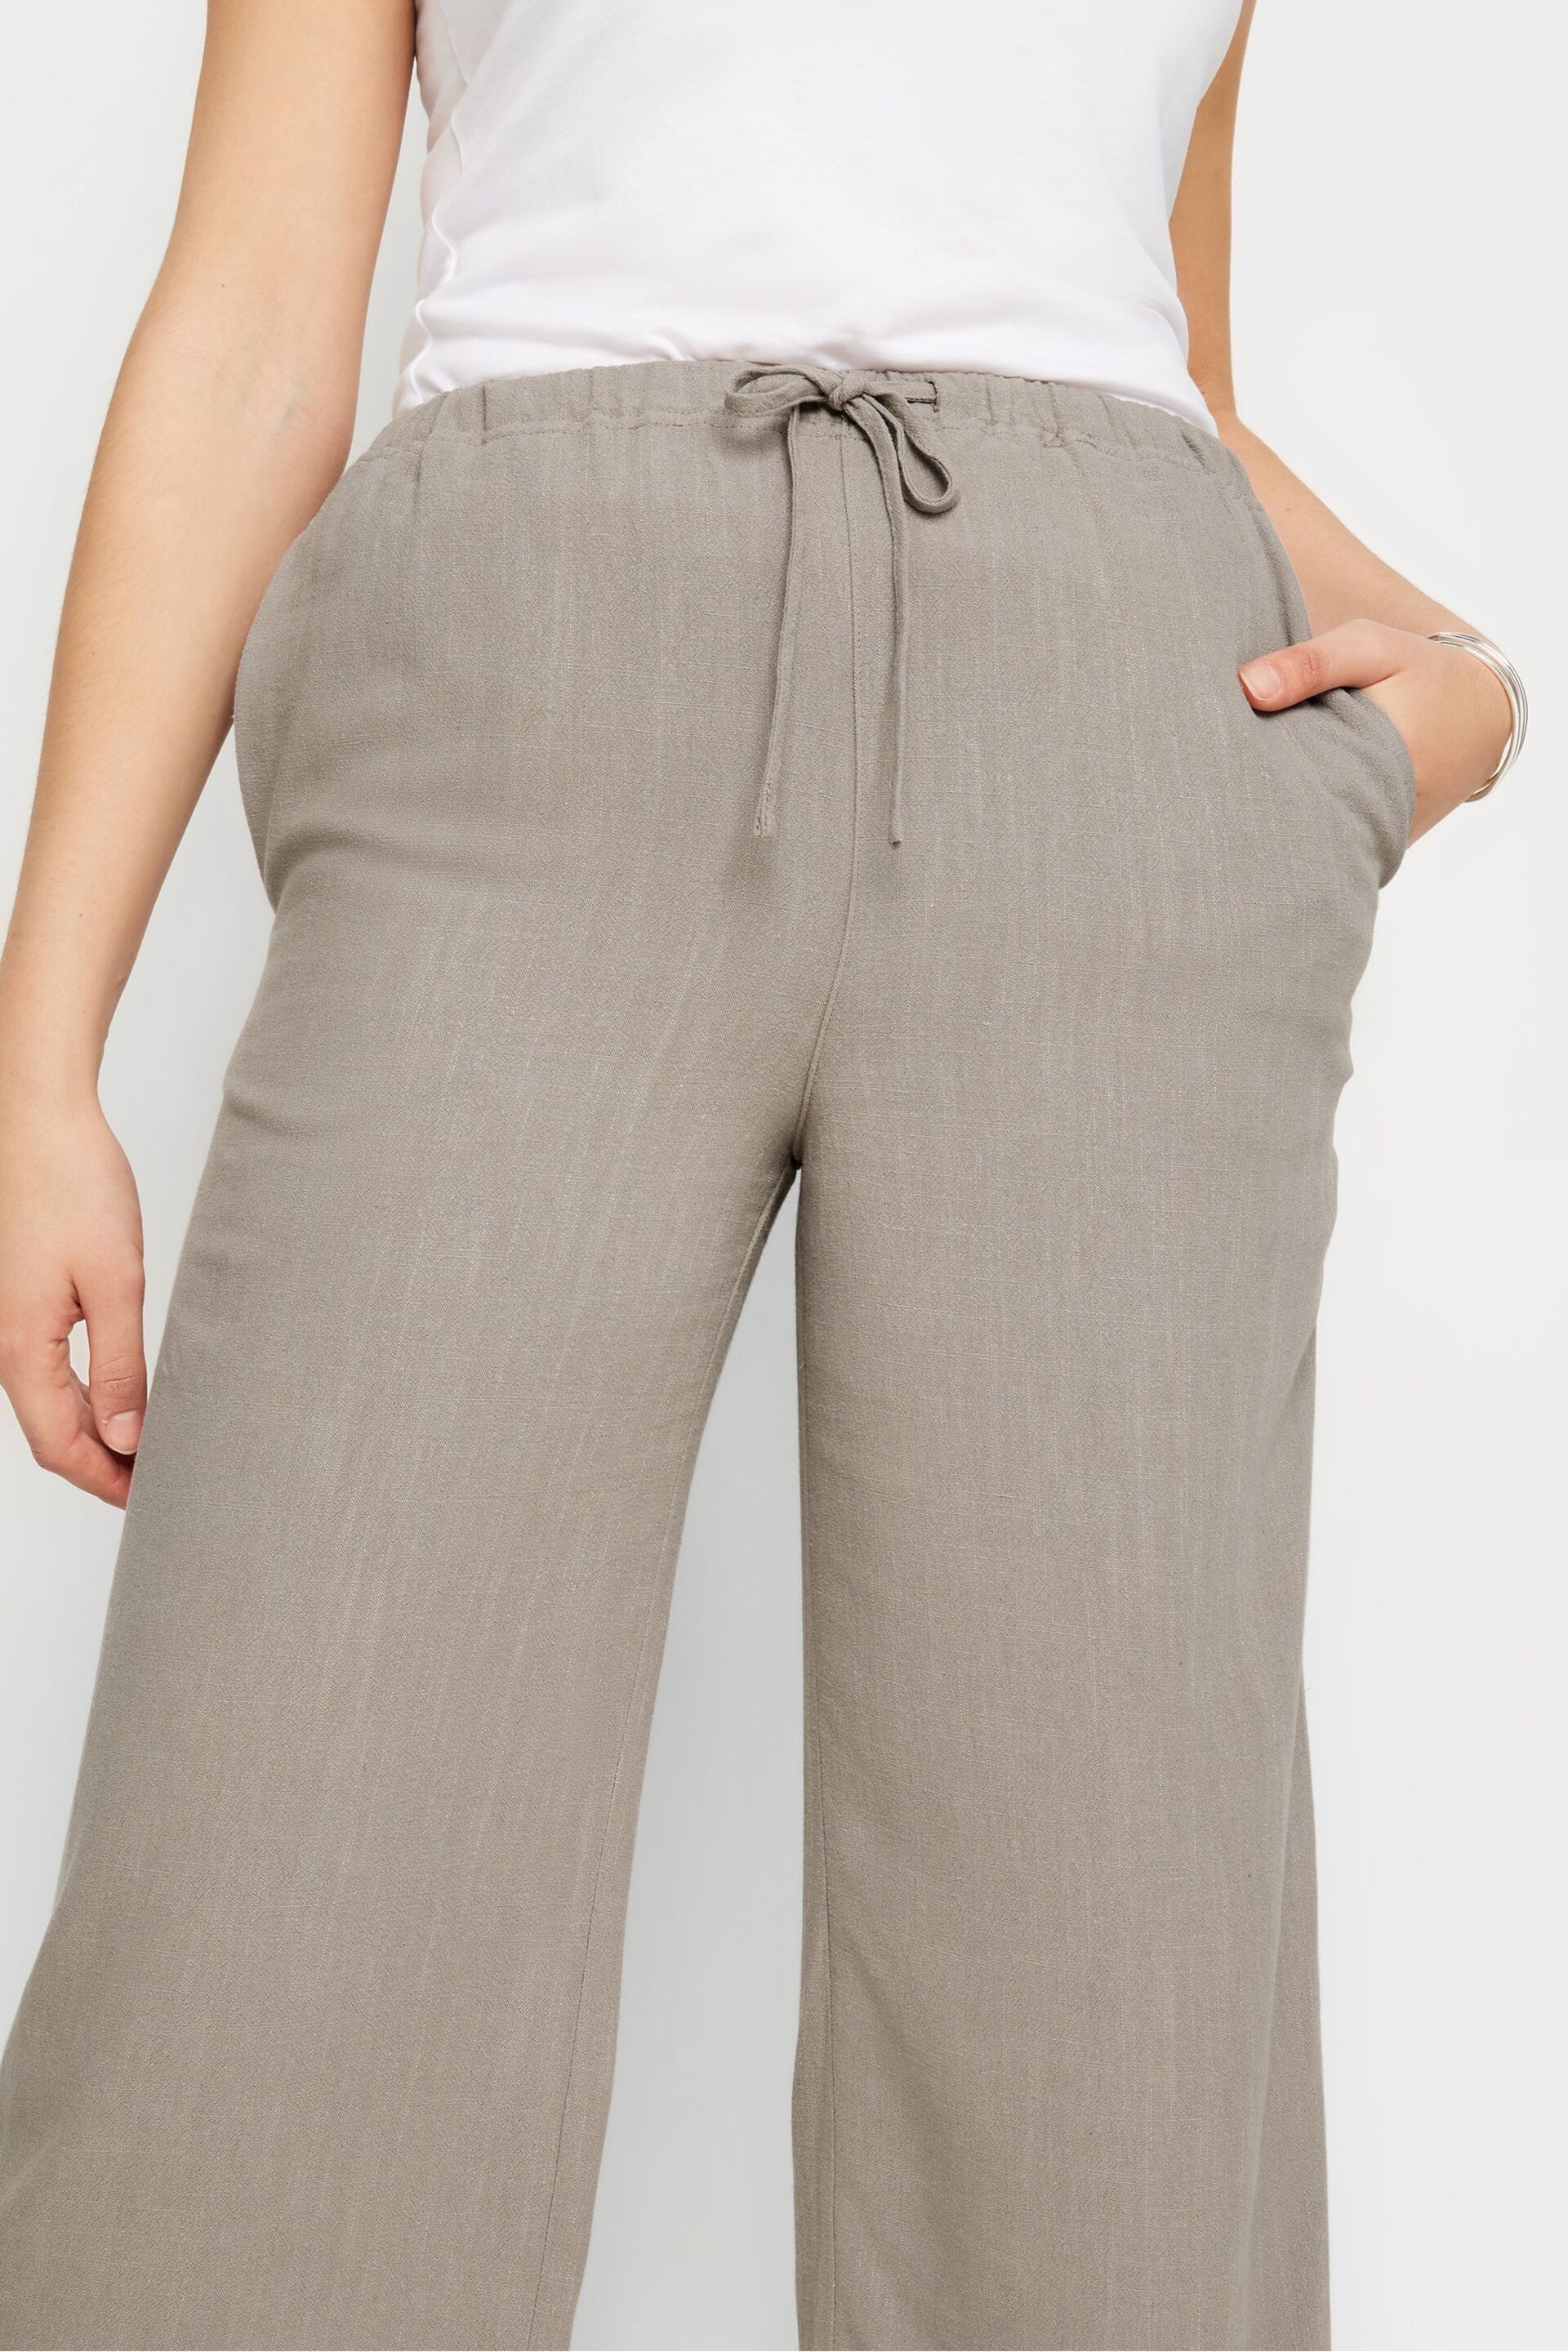 Long Tall Sally Natural Cropped Sand Linen Blend Trousers - Image 4 of 5